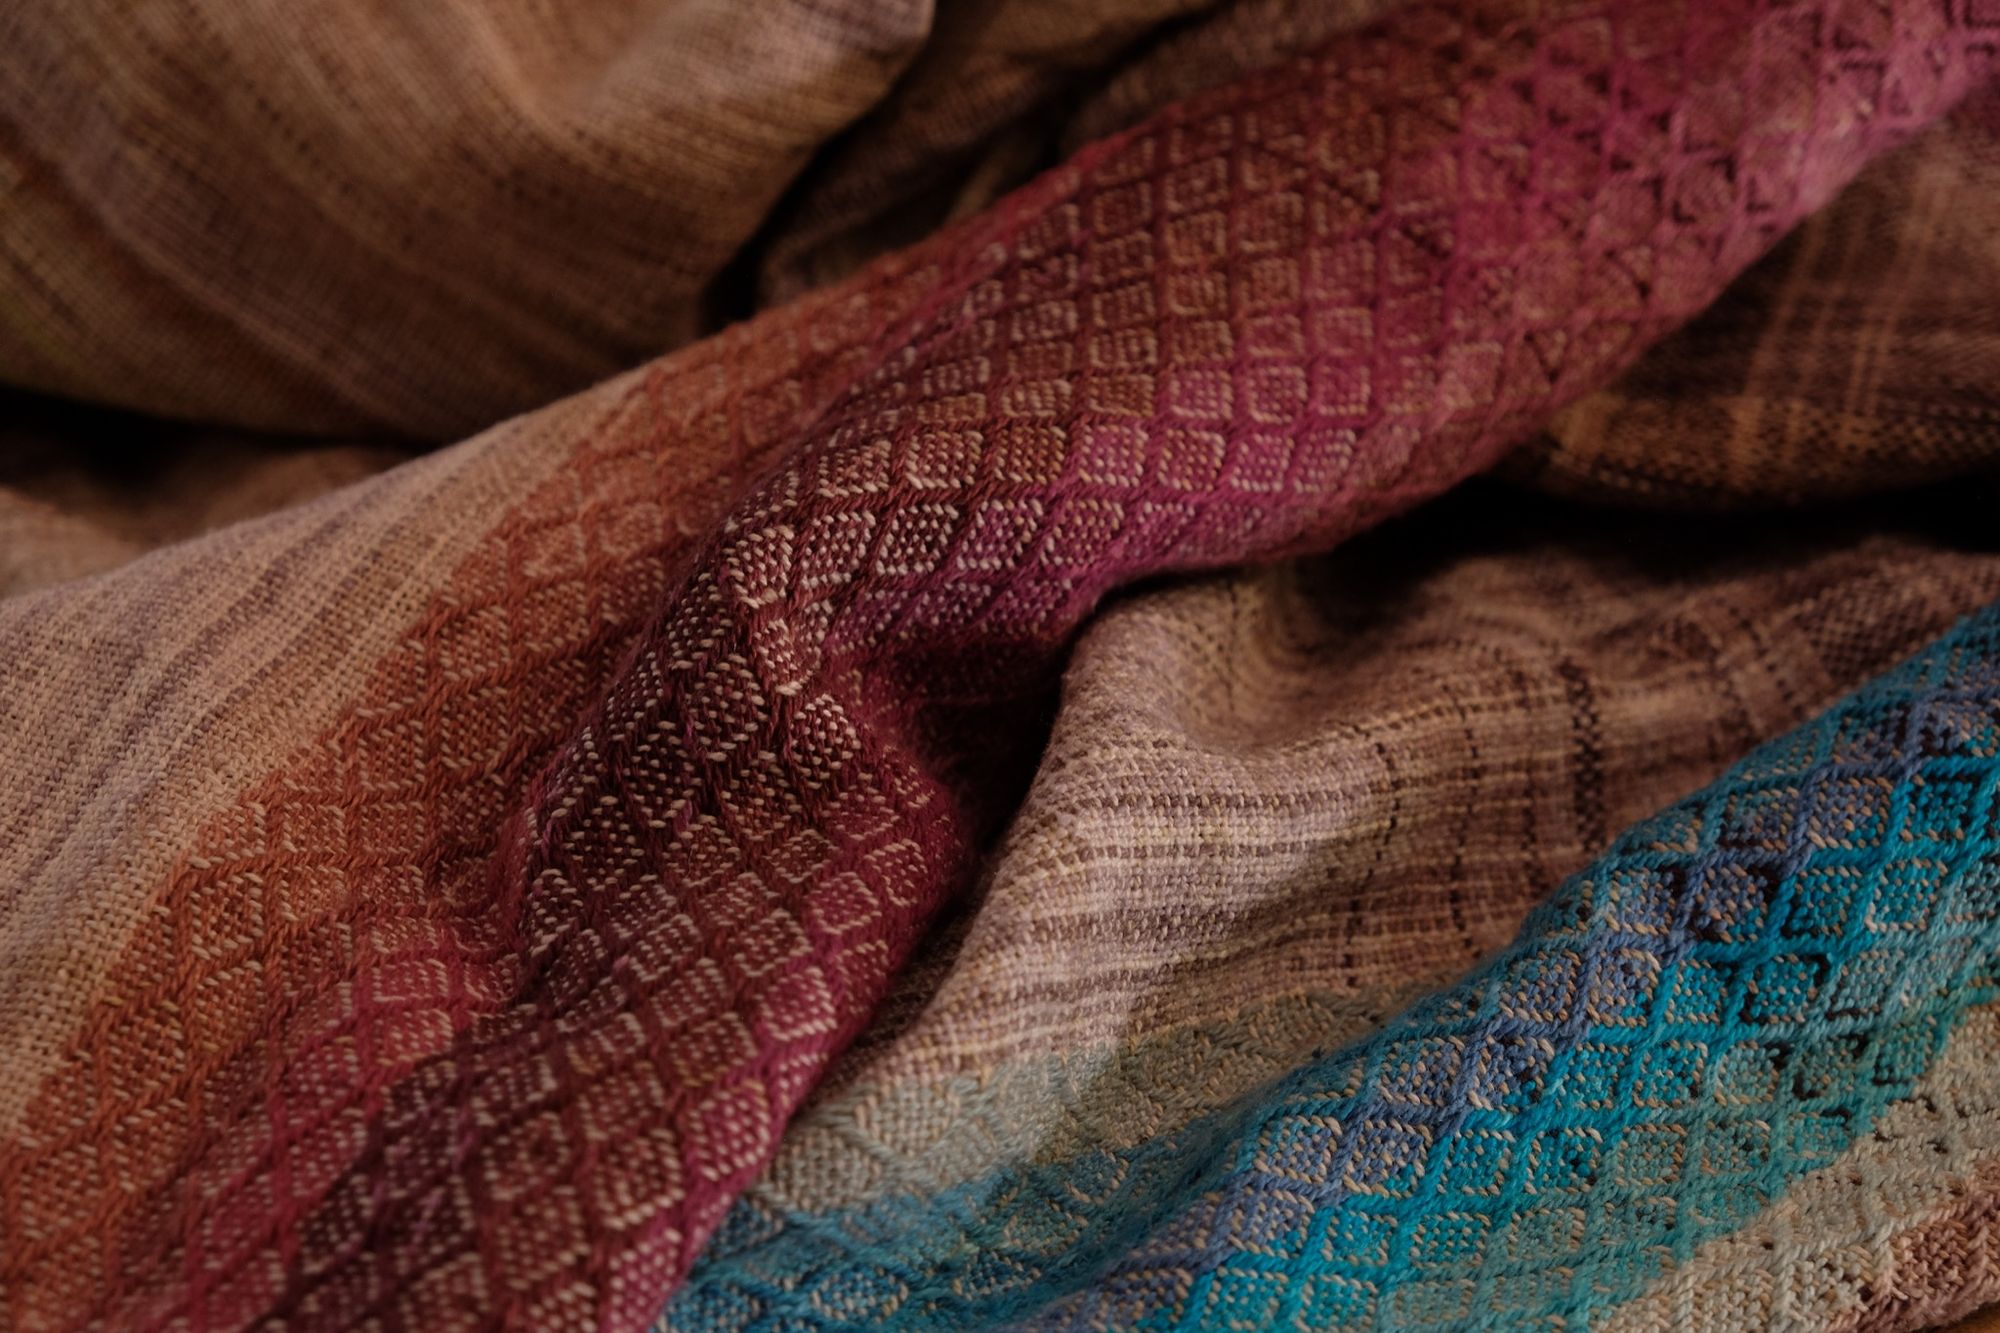 A handwoven, diamond pattern shawl in blues, grey, black, brown, pink and green laying on a wooden flor